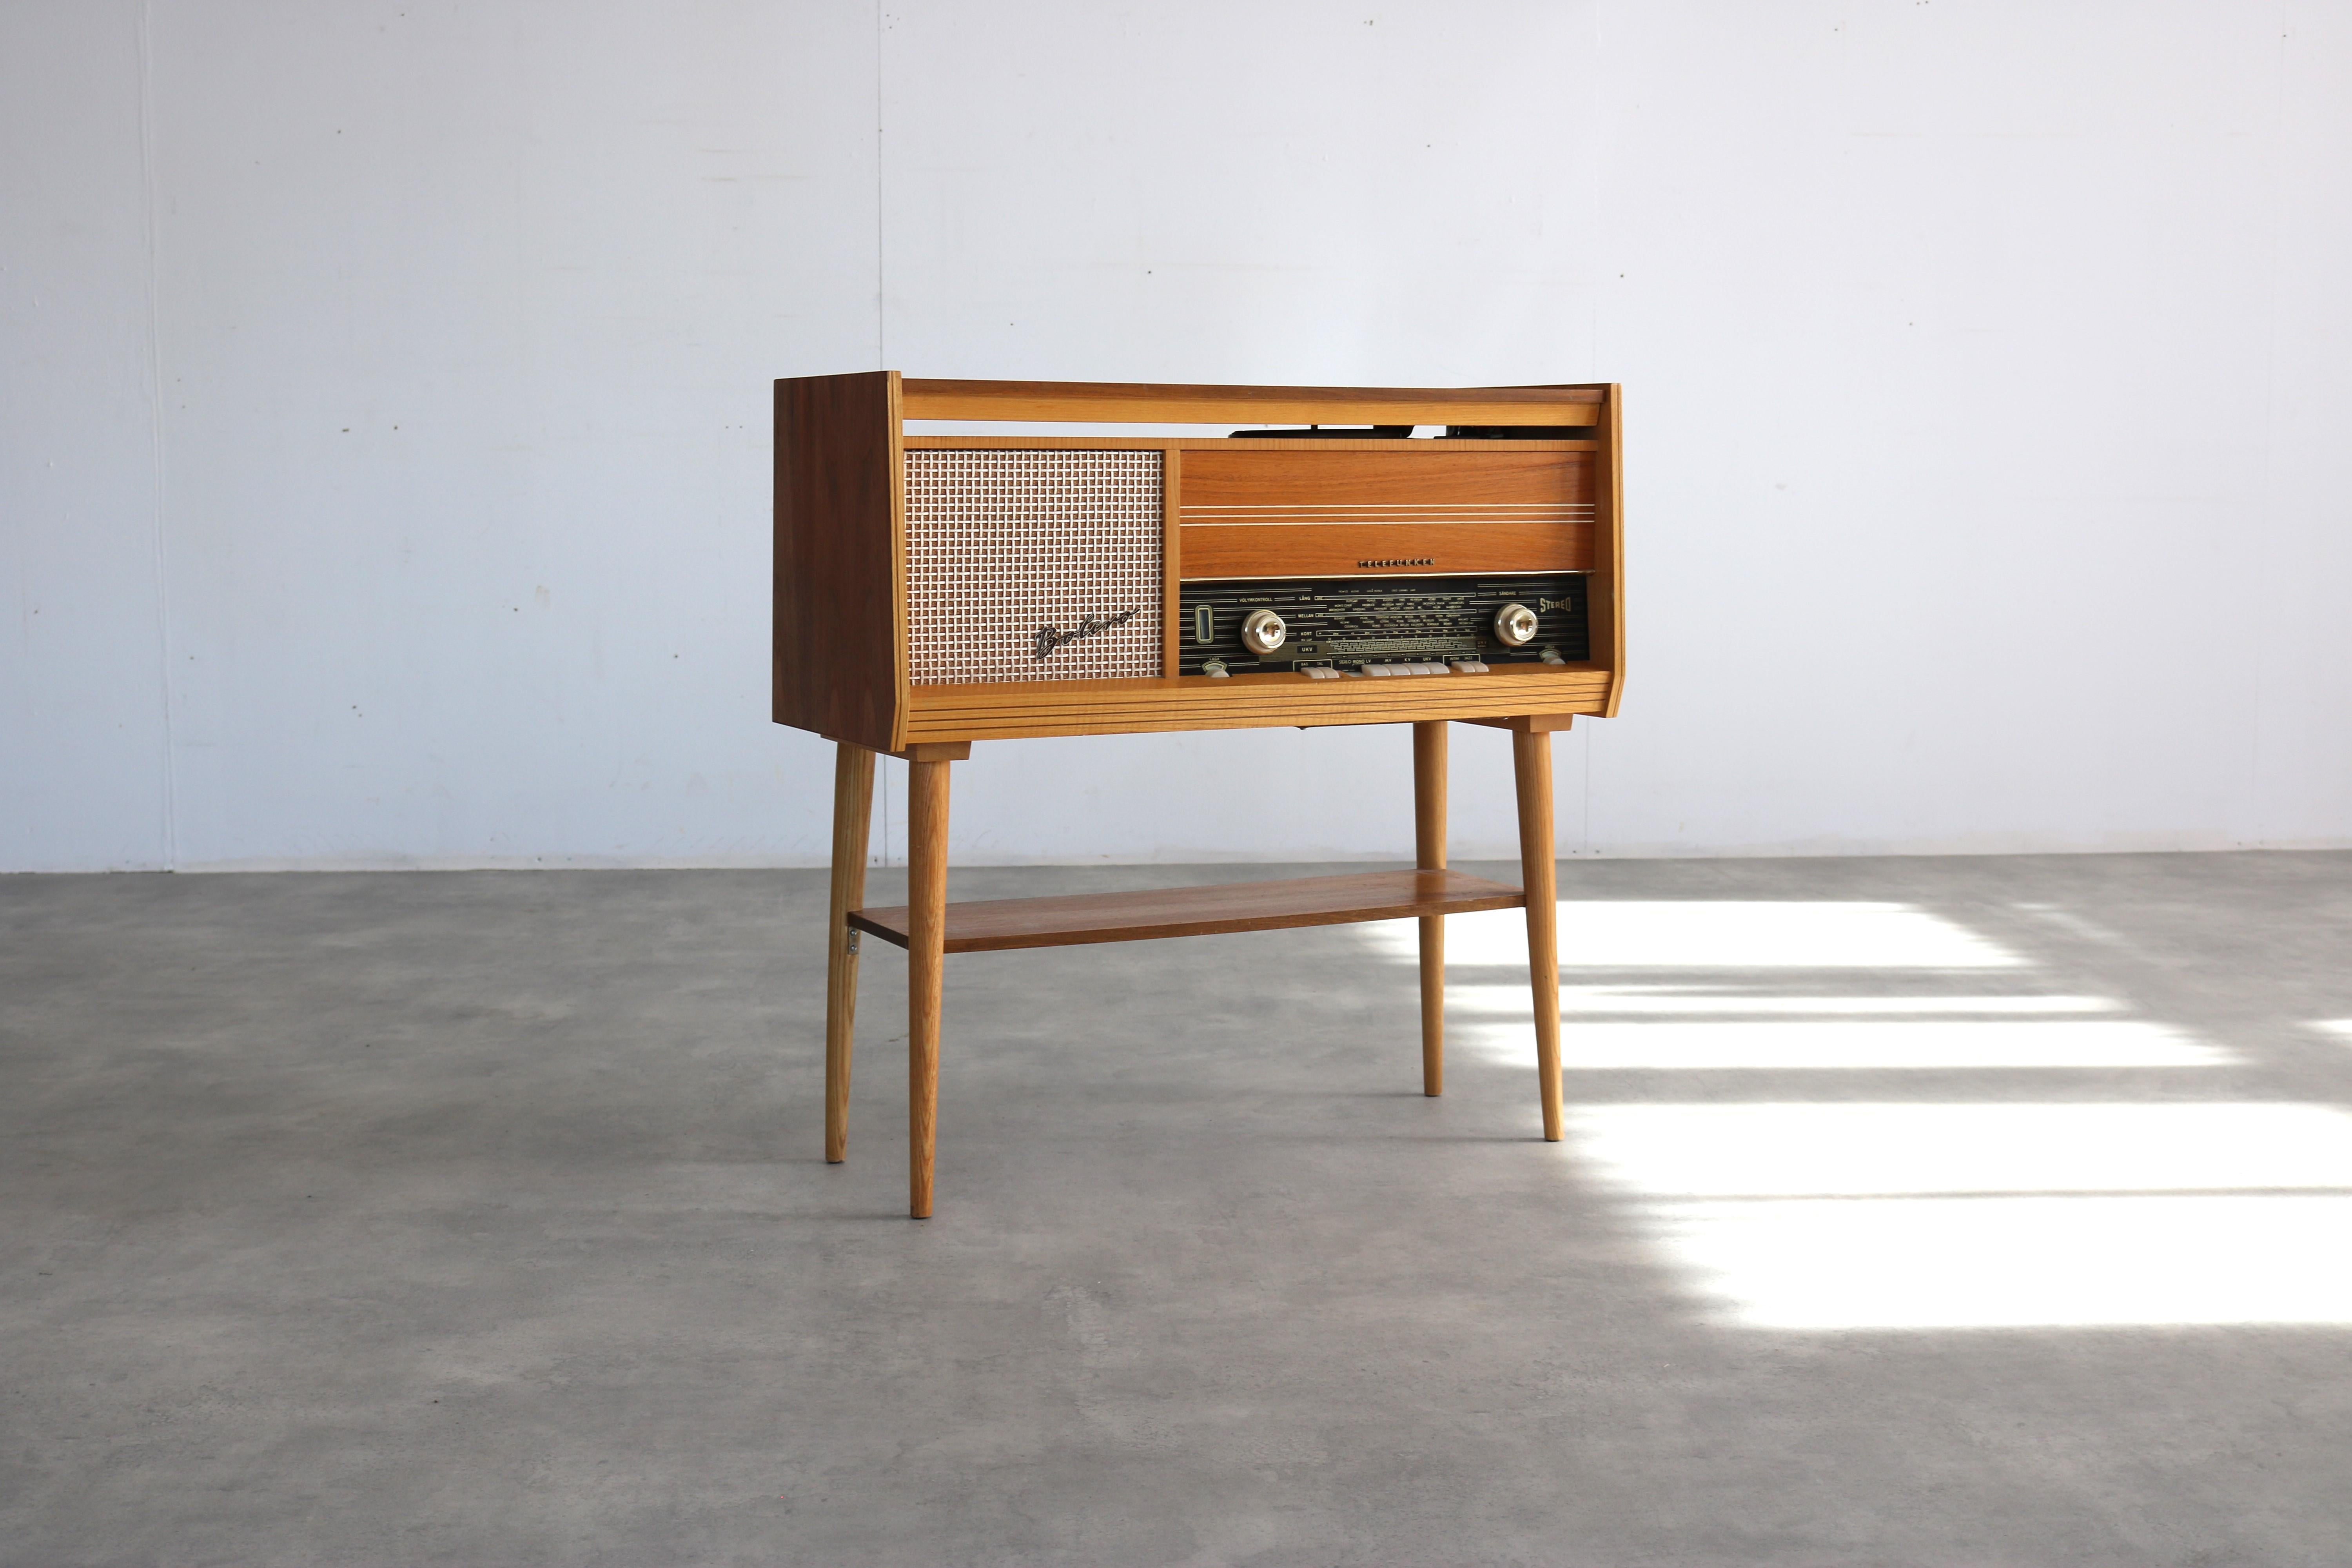 vintage audio furniture  side table  Telefunken  Sweden

period  60's
design  Telefunken  Bolero  Sweden
condition  good  light signs of use  radio/vinyl player not working and needs to be checked if useable;
size  70 x 80 x 40 (hxwxd)

details 